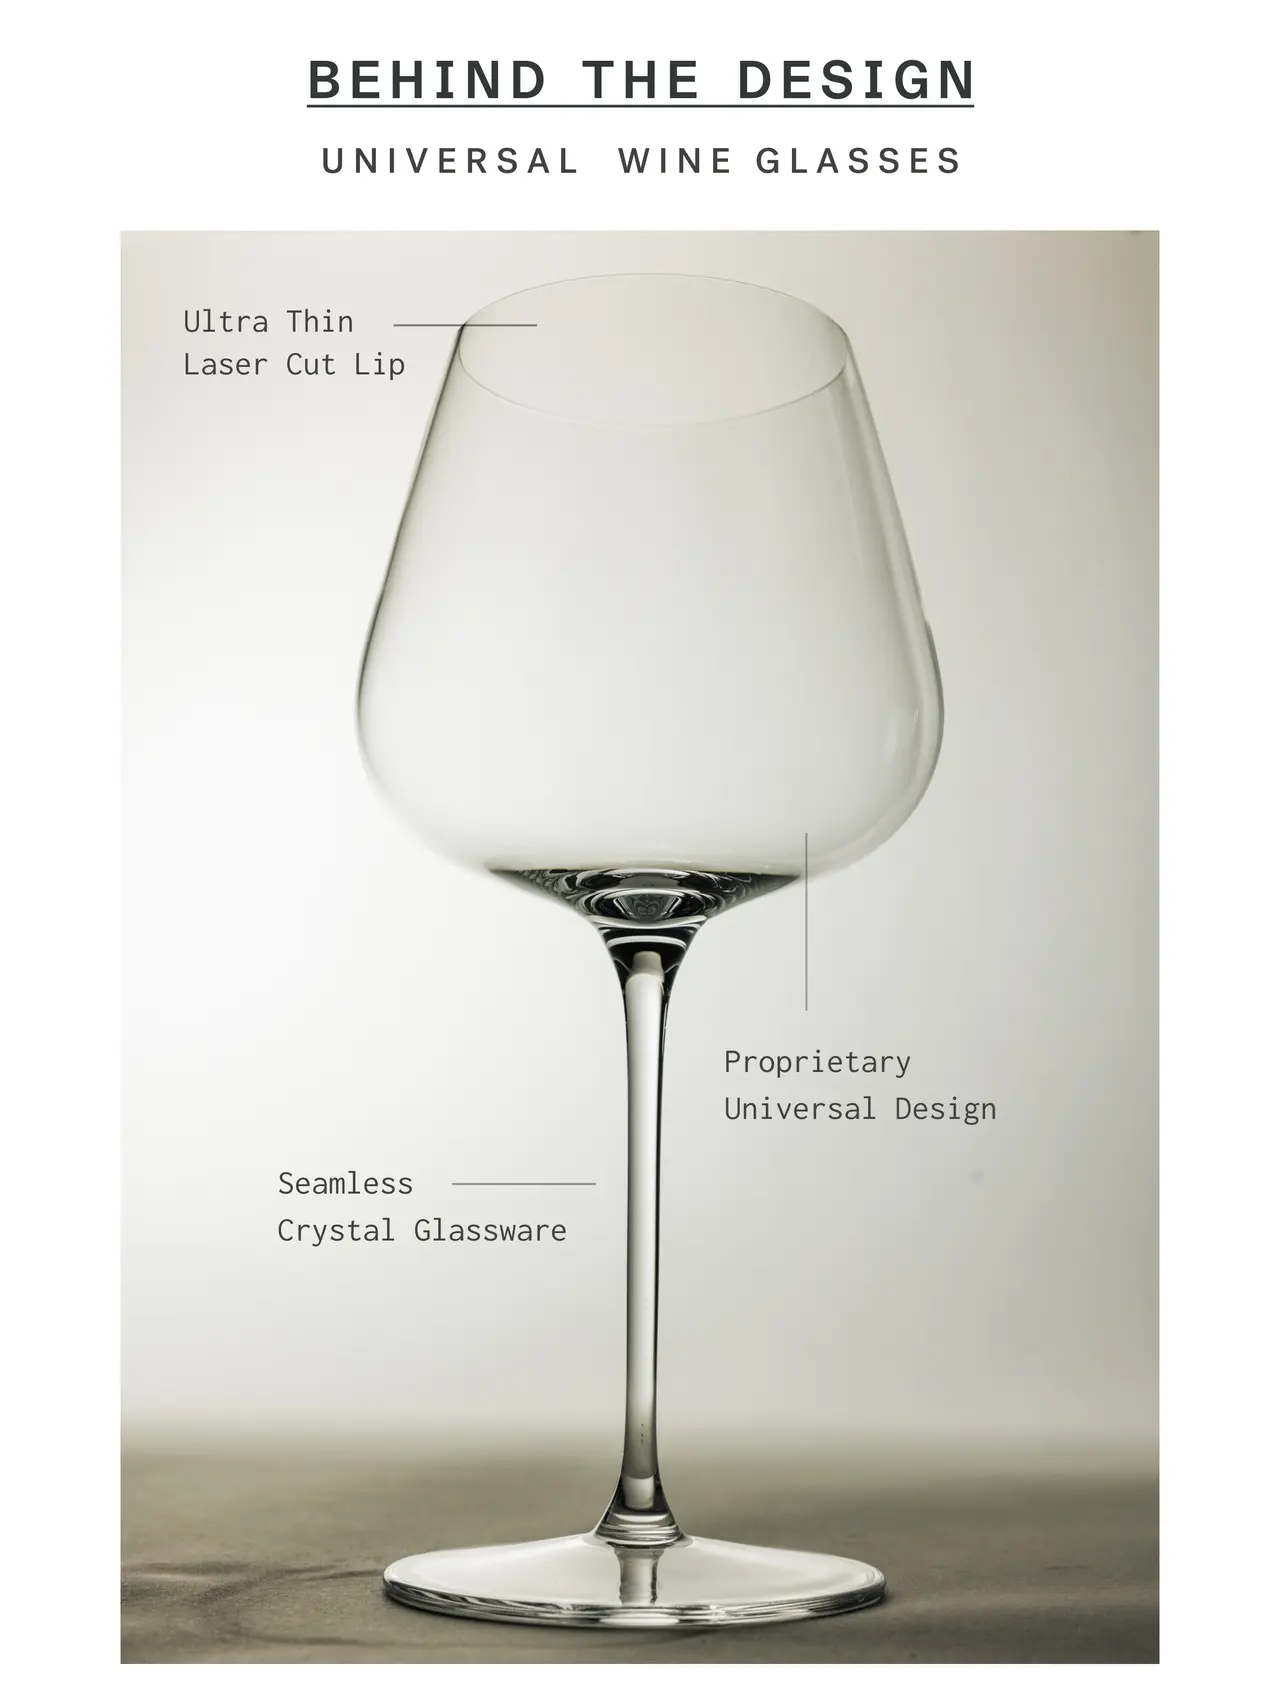 An elegant wine glass is showcased with annotations describing its design features, such as an "Ultra Thin Laser Cut Lip," "Seamless Crystal Glassware," and "Proprietary Universal Design."